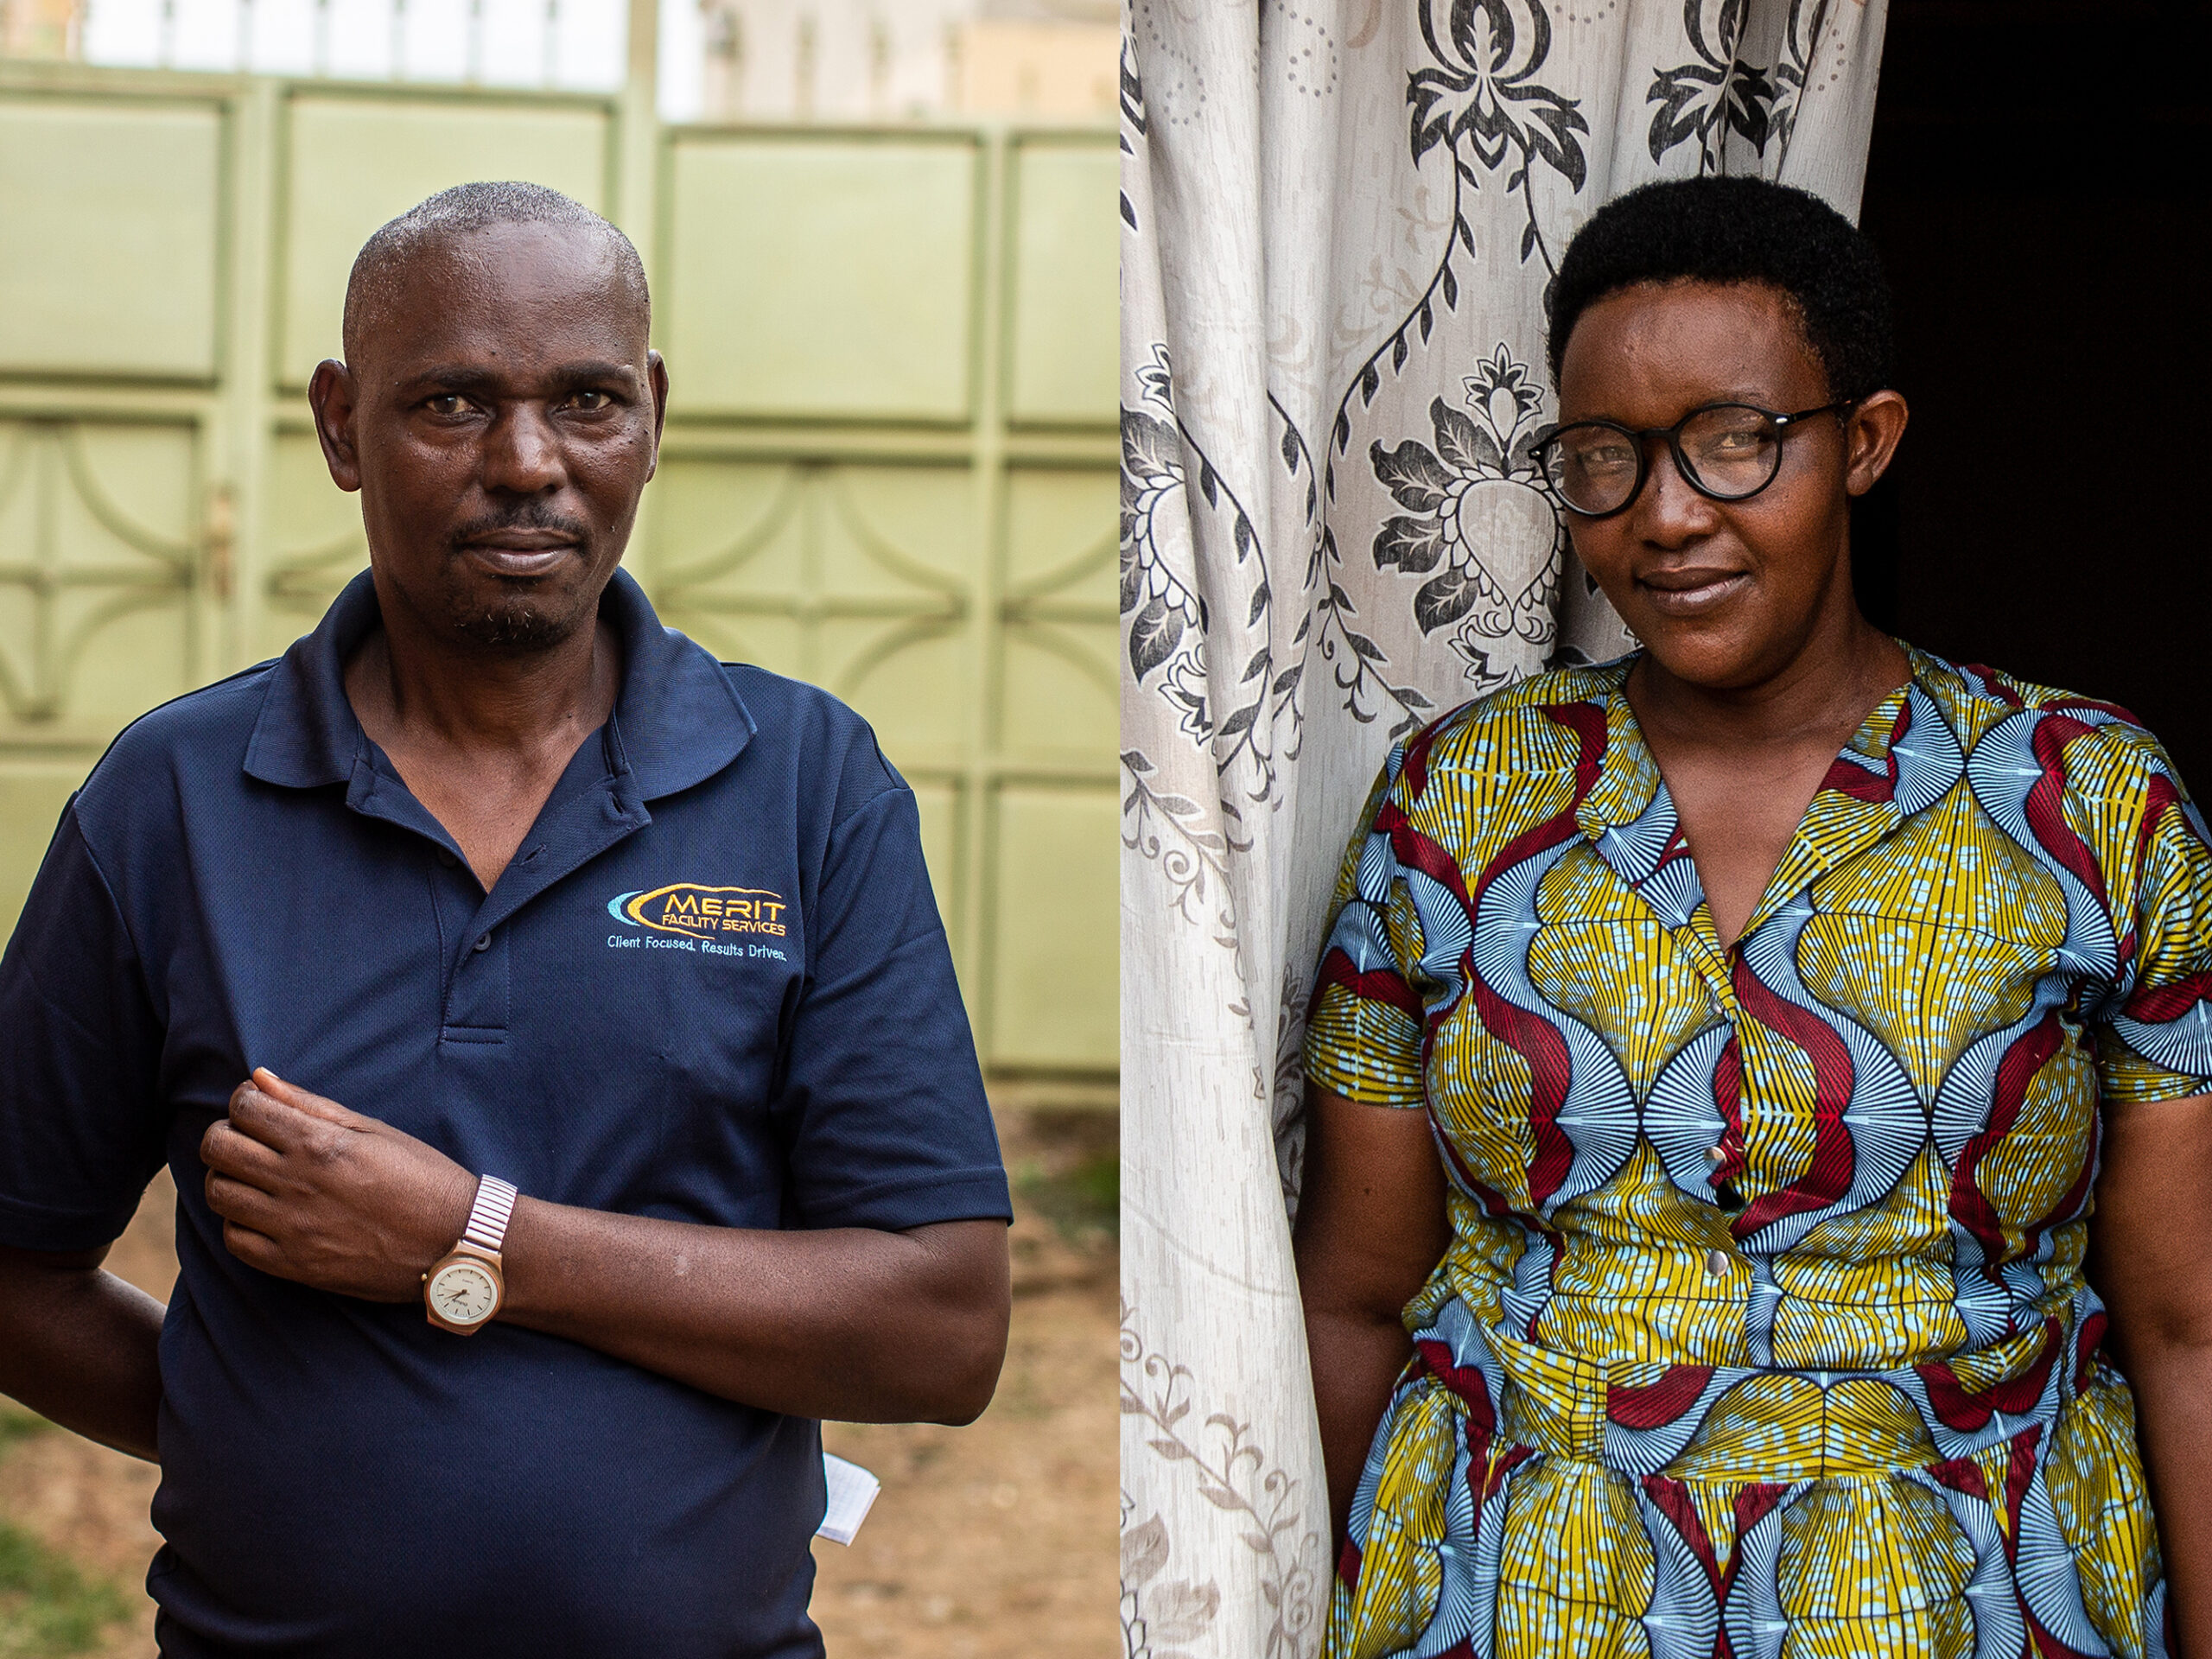 In this Rwandan village, survivors and perpetrators of the genocide live side by side